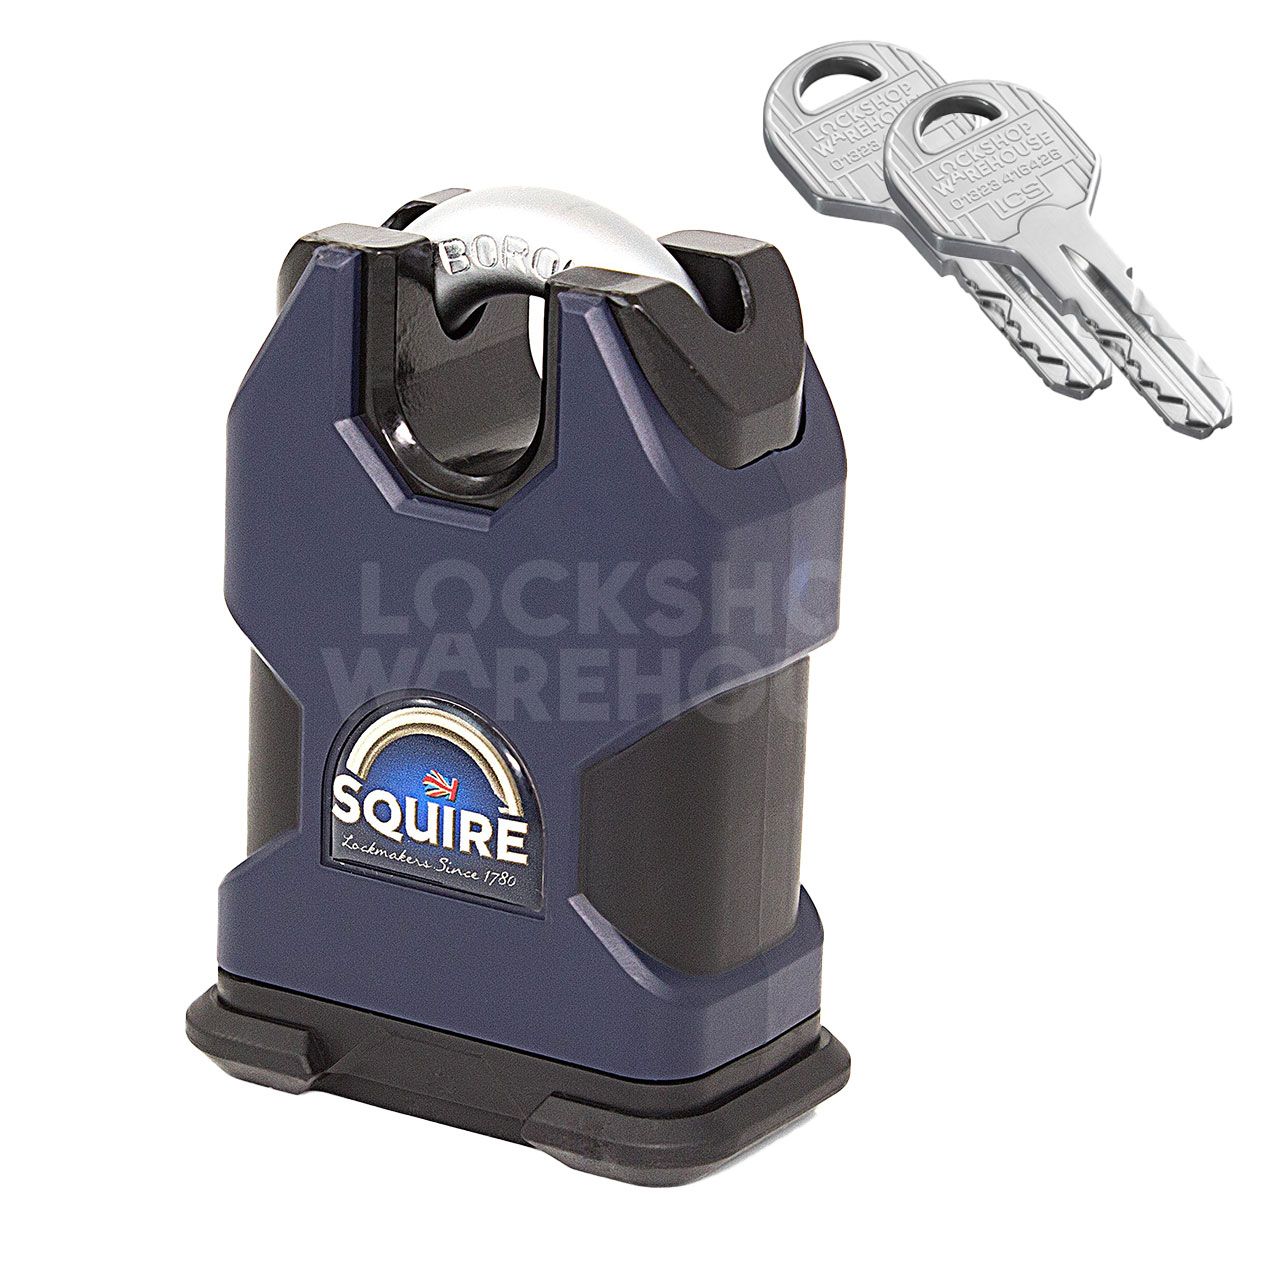 SQUIRE Stronghold® SS50CS Padlock with EVVA ICS key - Fully Protected key